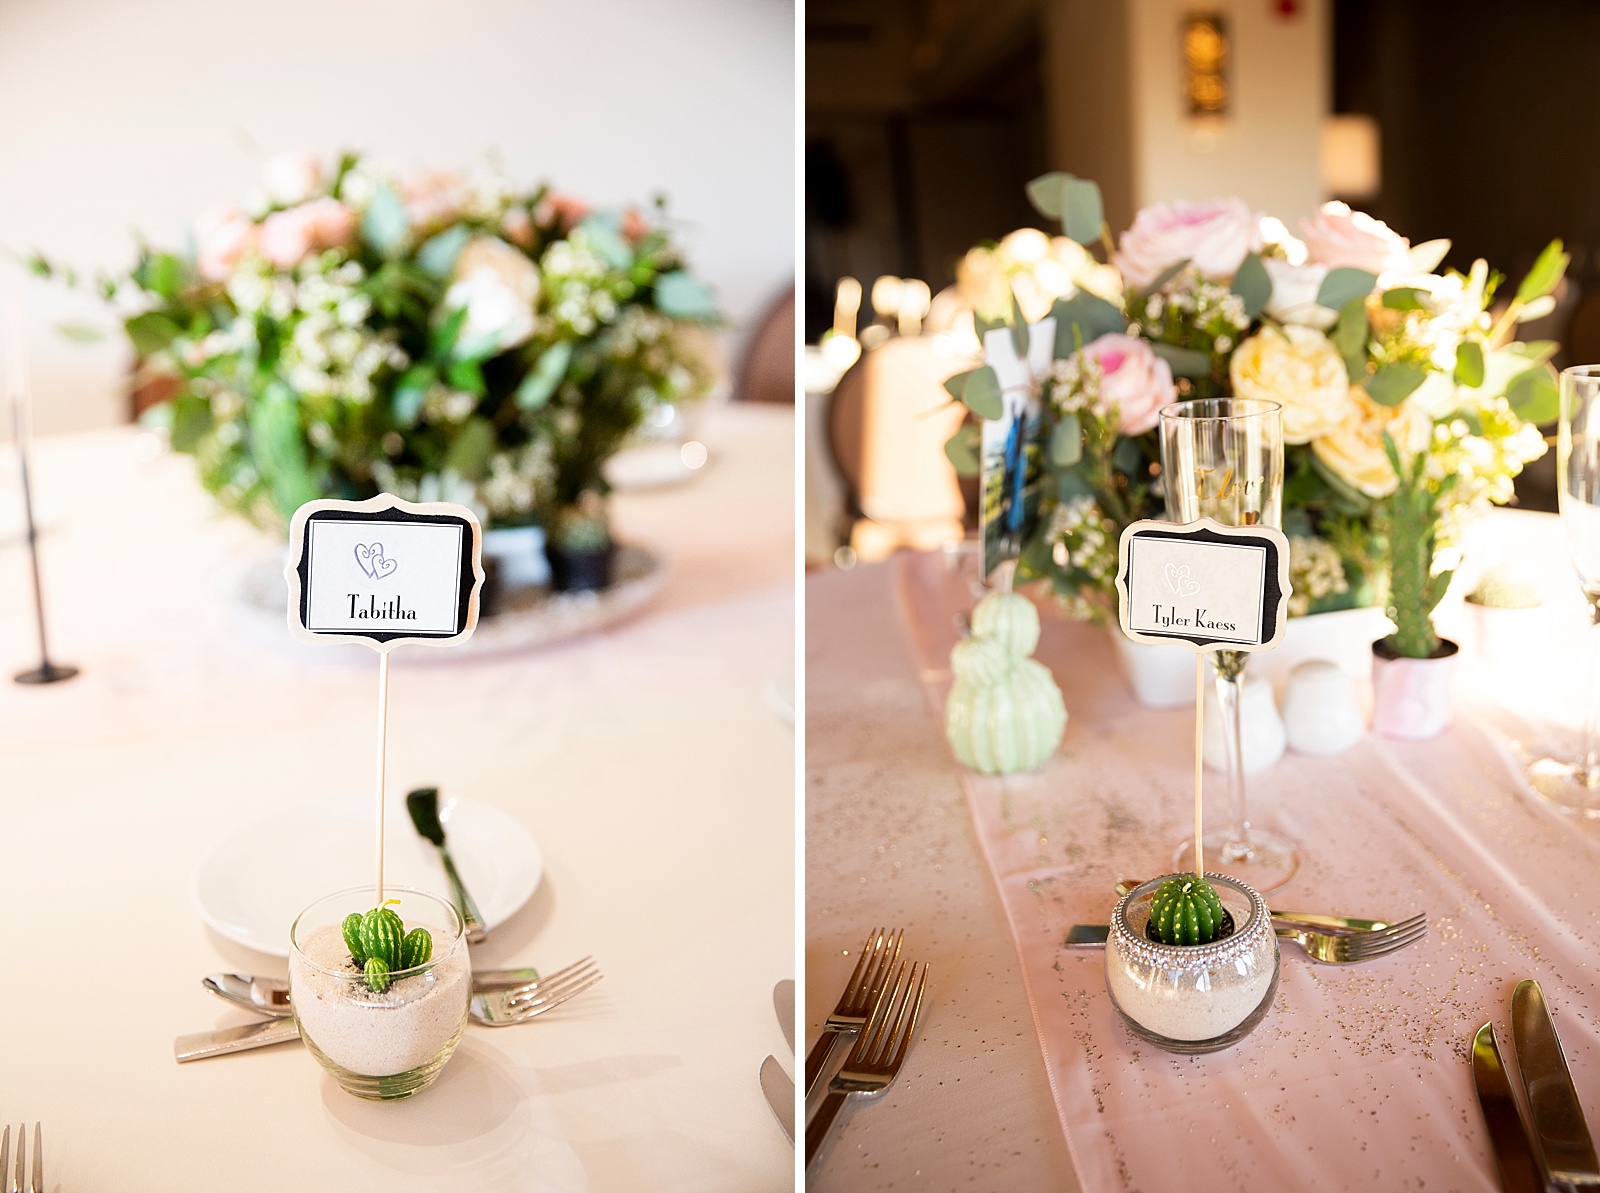 reception details inspired by desert photographed by Arionza wedding photographer Randi Michelle Photography